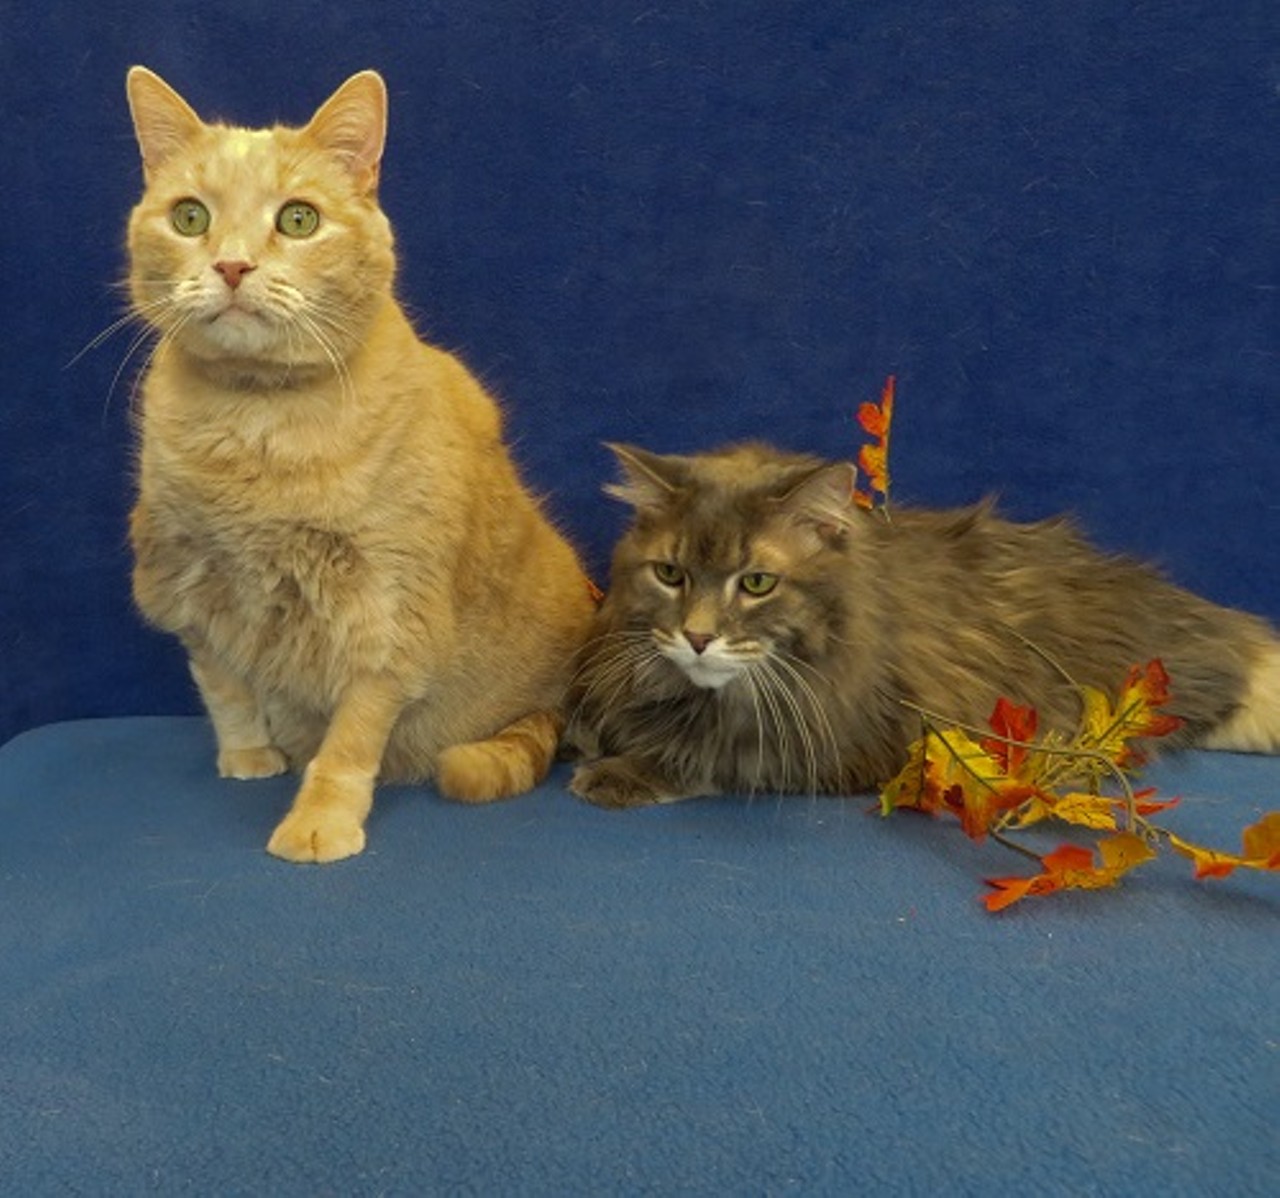 Crickett and 
Toby
GENDERS: Both are male
BREEDS: Domestic long hair and domestic short hair, respectively
AGES: Both are 11 years, 3 months
WEIGHTS: 14 pounds and 16 pounds, respectively
SPECIAL CONSIDERATIONS: Crickett is an amputee and must be adopted with his best friend Toby
REASON I CAME TO MHS: Owner surrender
LOCATION: Mackey Center for Animal Care in Detroit
ID NUMBERS: 854468 and 854467, respectively